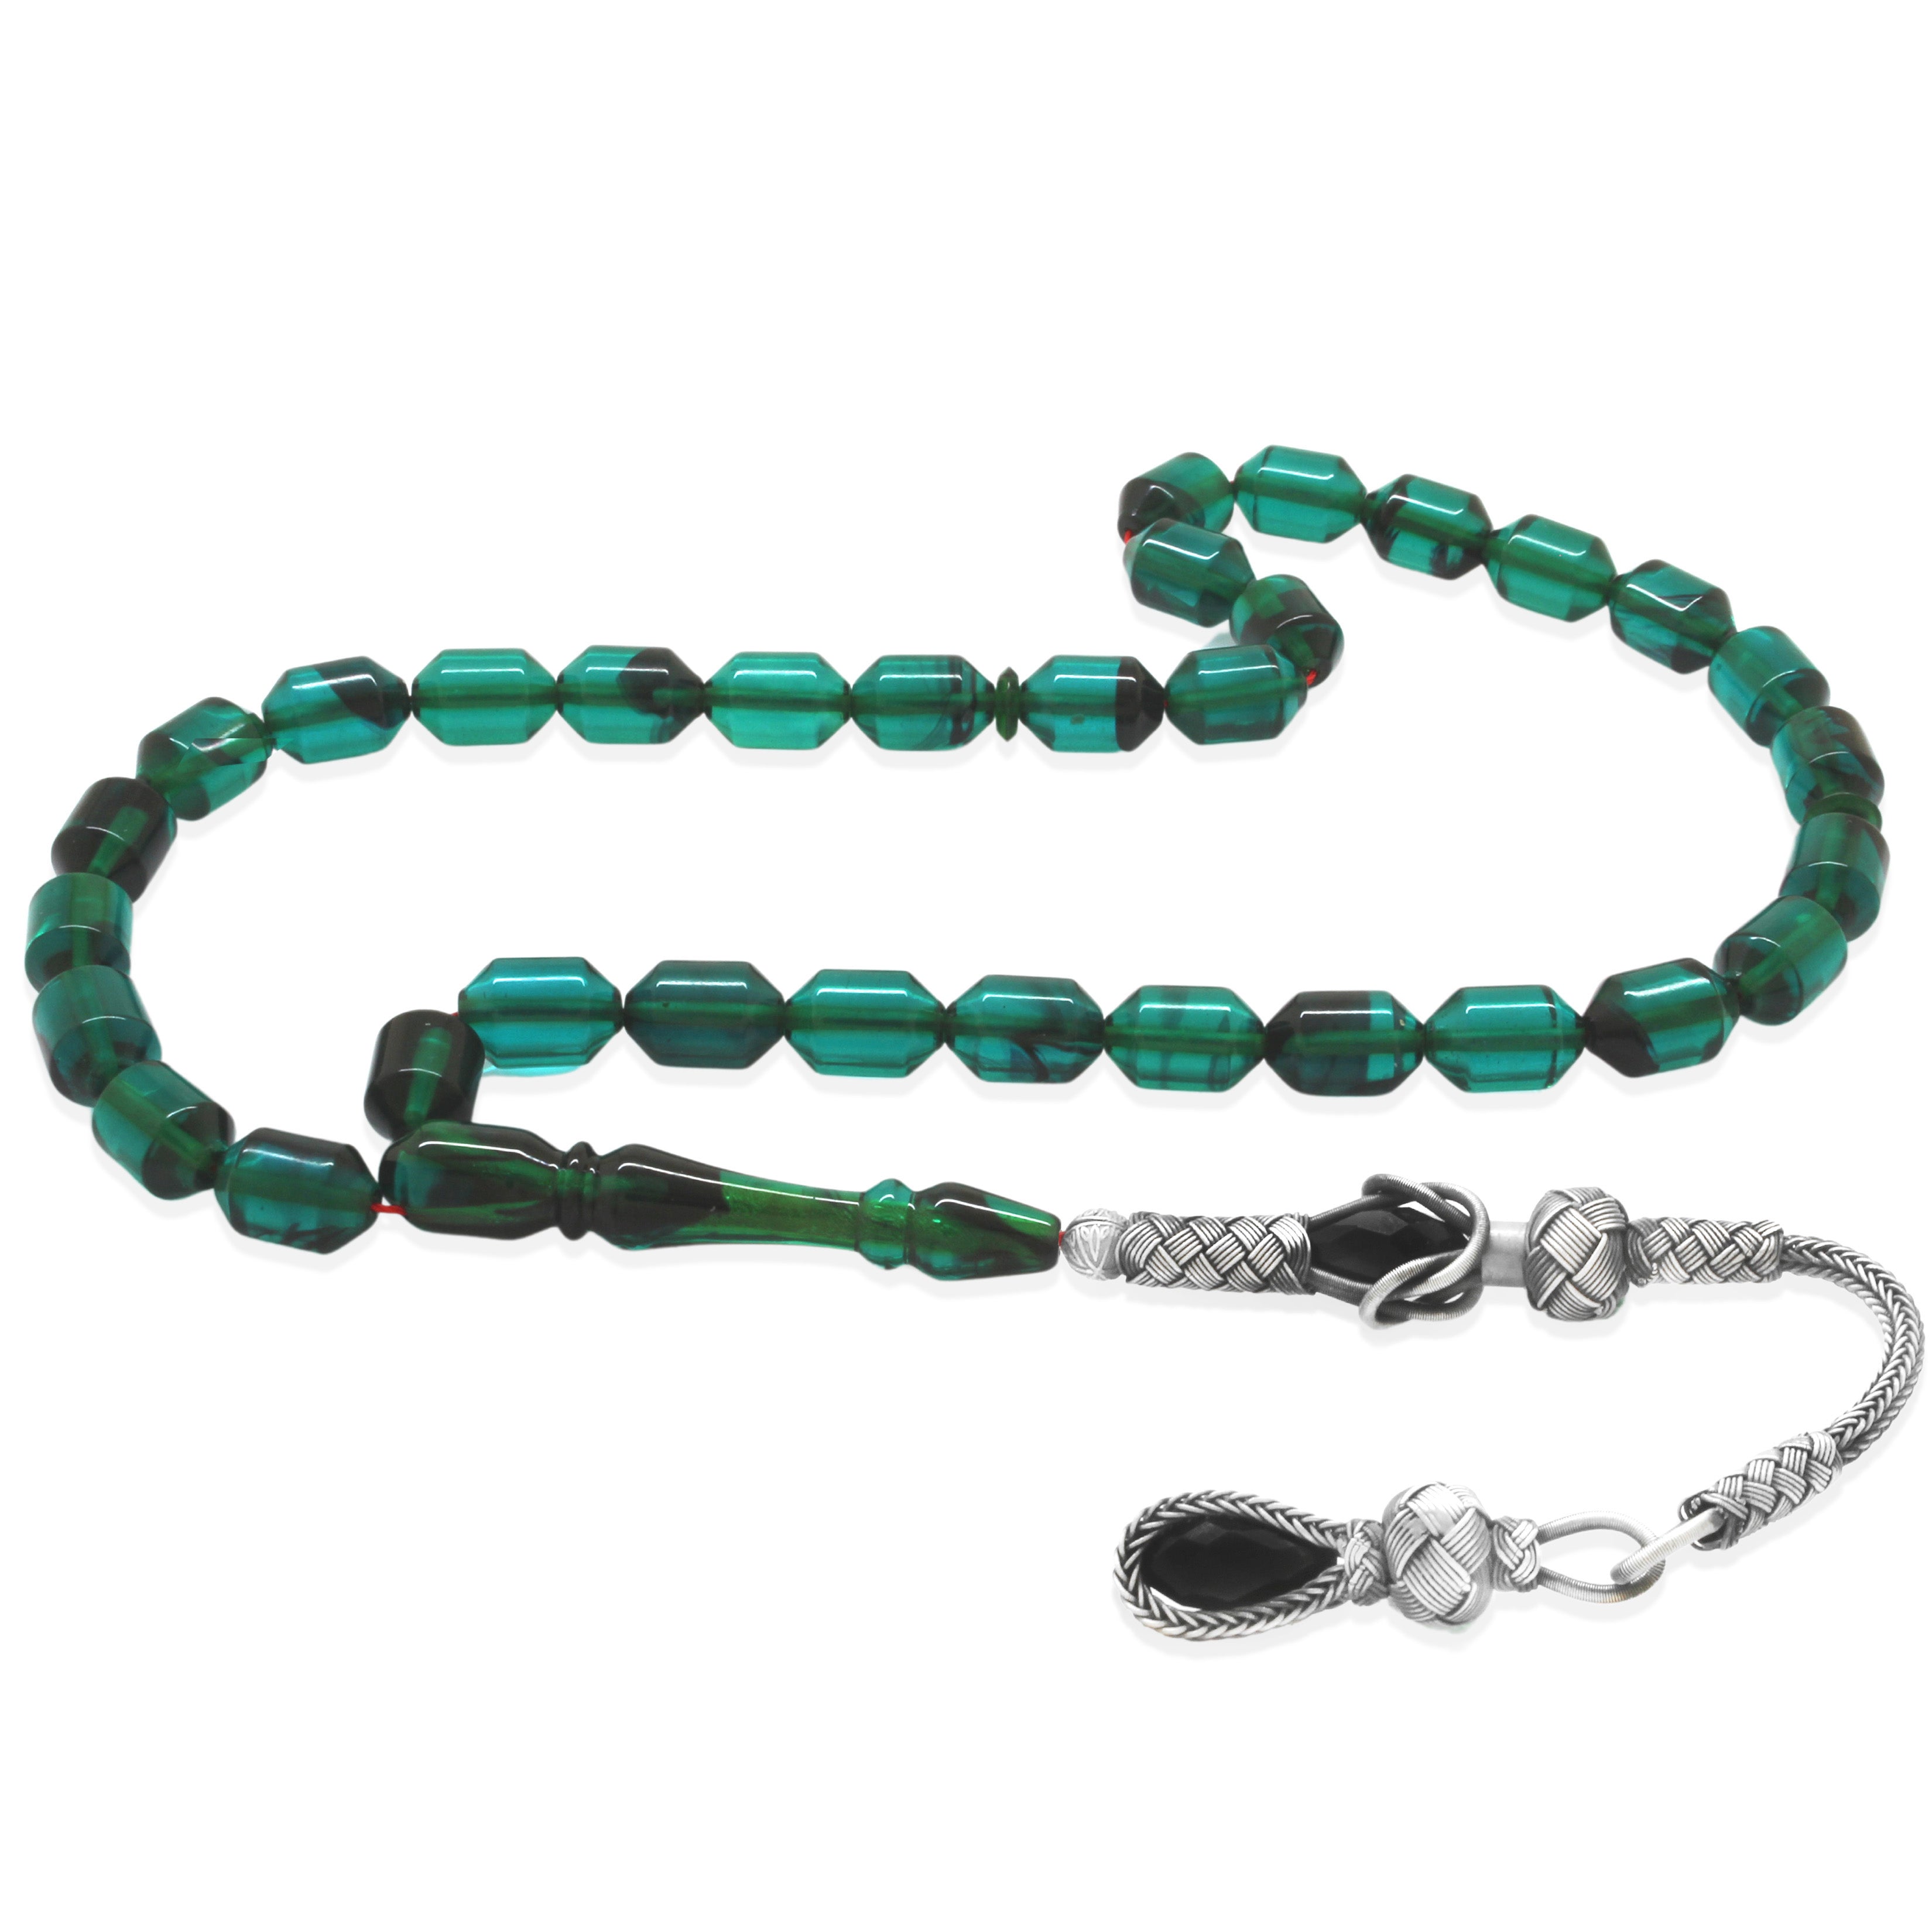 1000 Sterling Silver Kazaz Tasseled End Capsule Cut Turquoise-Black Fire Amber Rosary